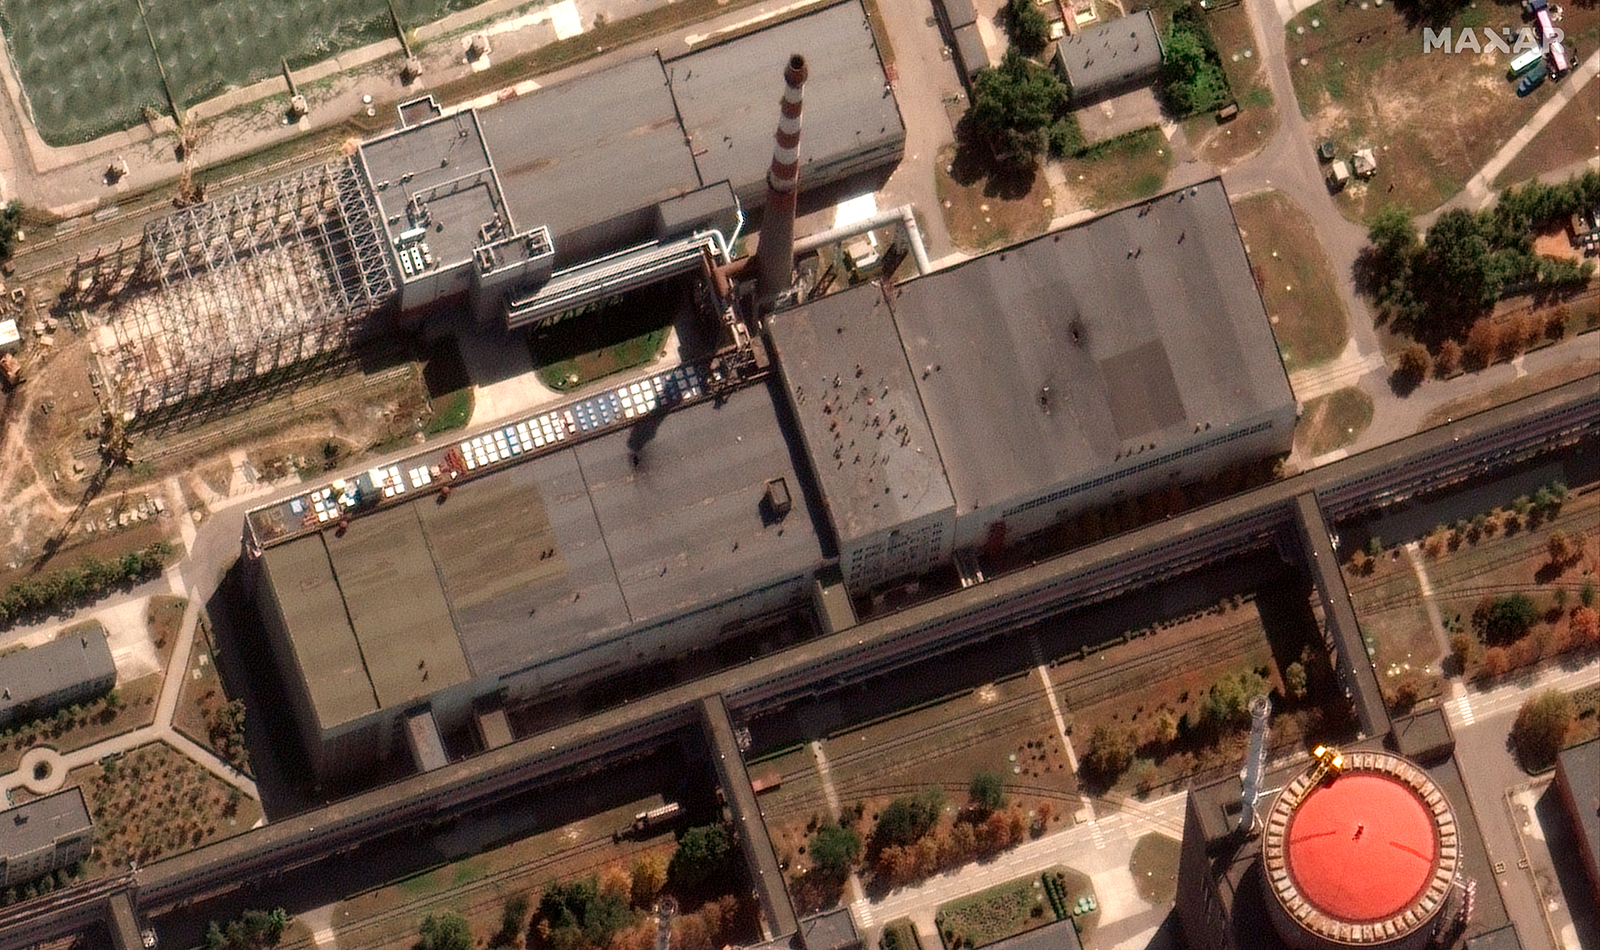 This satellite image shows damage to the roof of a building adjacent to several of the nuclear reactors at the Zaporizhzhia nuclear plant on August, 29.